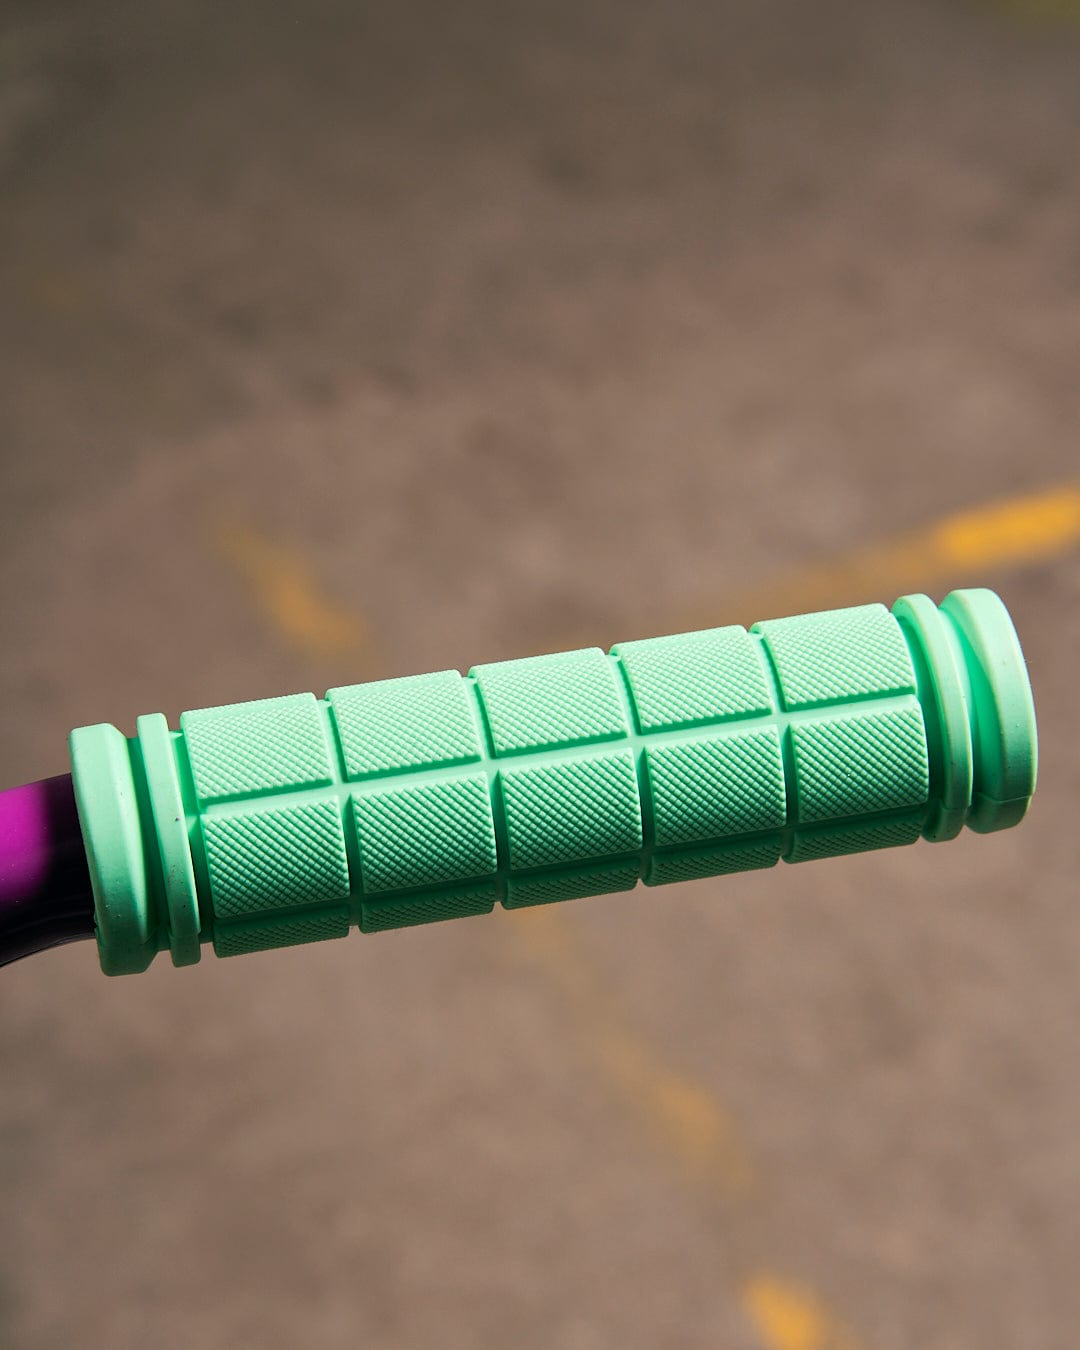 A close up of a Saltrock Creeper Stunt Scooter - Turquoise handlebar grip.